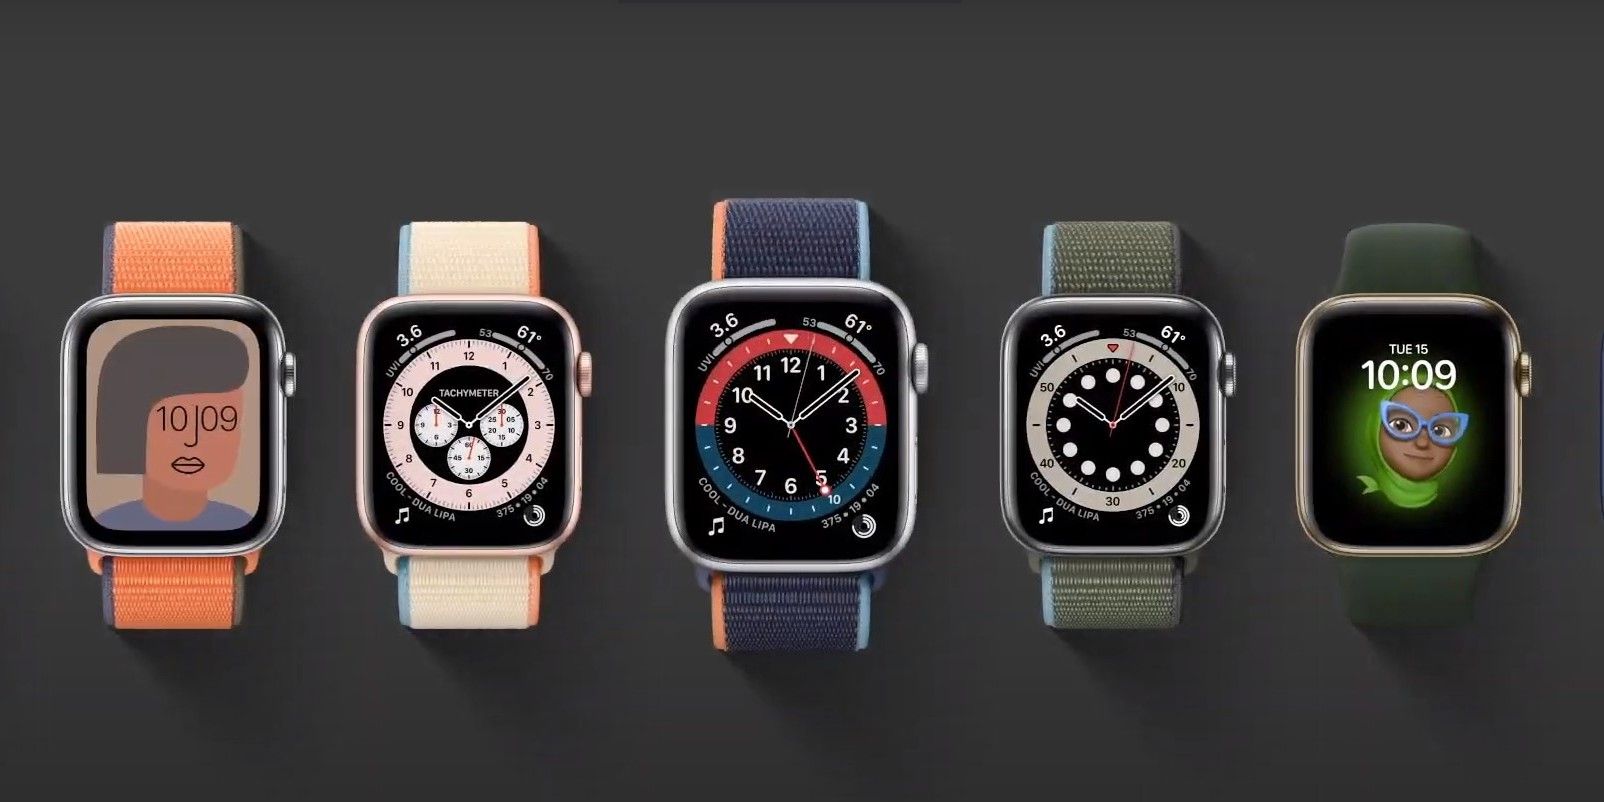 Apple Watch Series 6 All The New Watch Faces To Choose From